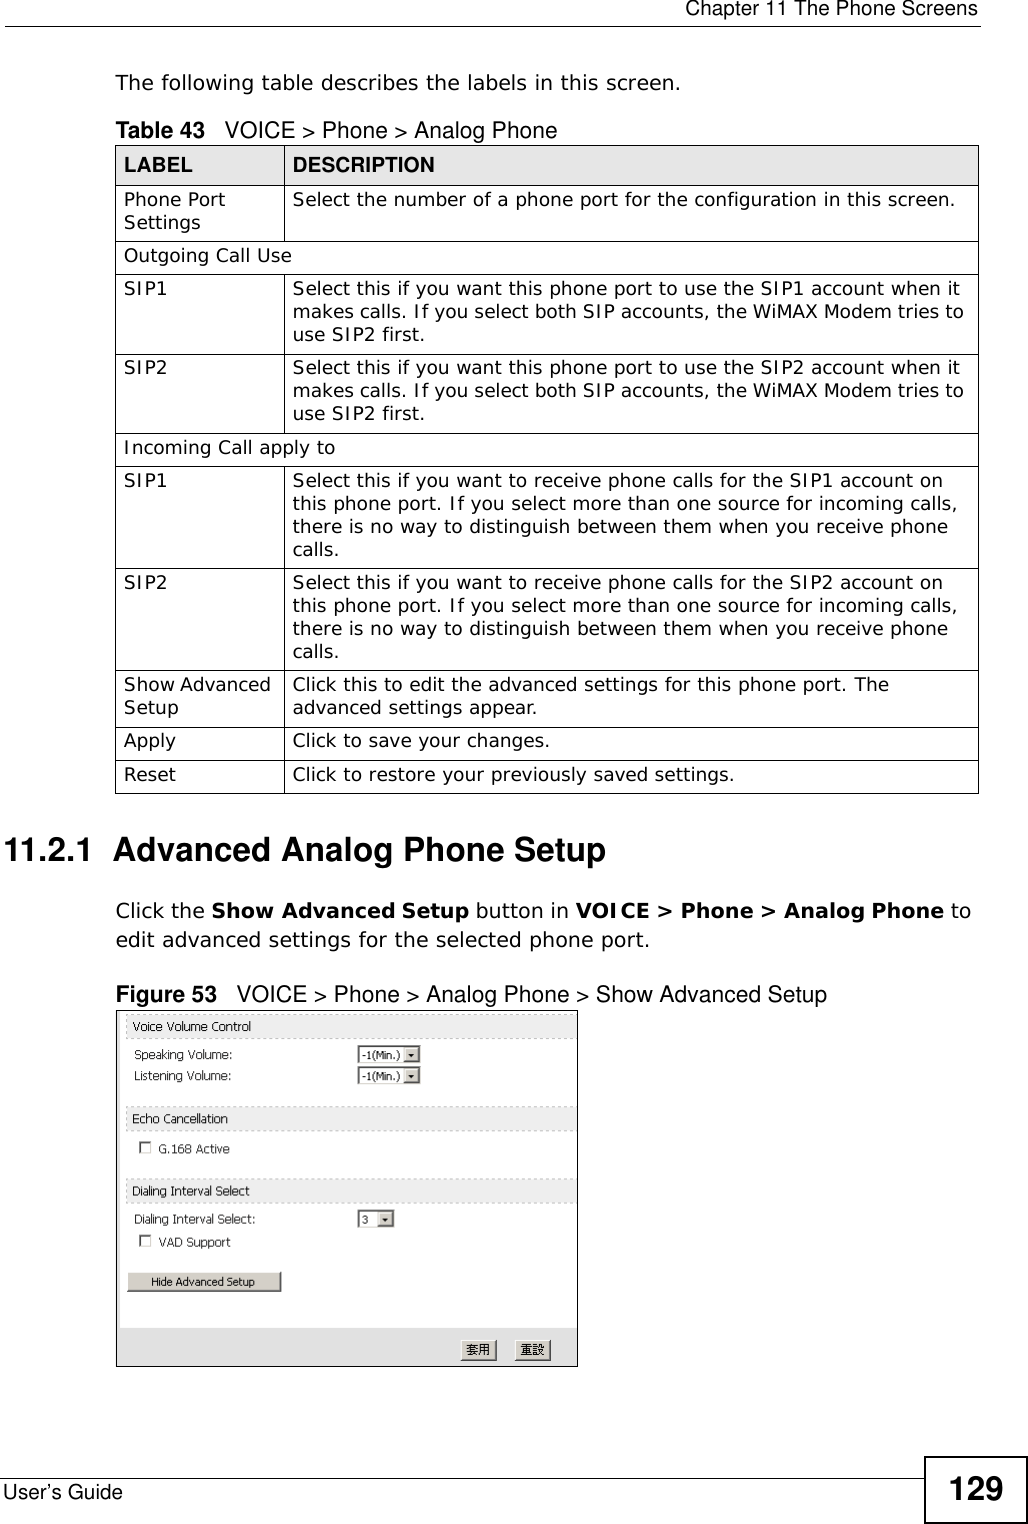  Chapter 11 The Phone ScreensUser’s Guide 129The following table describes the labels in this screen.11.2.1  Advanced Analog Phone SetupClick the Show Advanced Setup button in VOICE &gt; Phone &gt; Analog Phone to edit advanced settings for the selected phone port.Figure 53   VOICE &gt; Phone &gt; Analog Phone &gt; Show Advanced SetupTable 43   VOICE &gt; Phone &gt; Analog PhoneLABEL DESCRIPTIONPhone Port Settings Select the number of a phone port for the configuration in this screen.Outgoing Call UseSIP1 Select this if you want this phone port to use the SIP1 account when it makes calls. If you select both SIP accounts, the WiMAX Modem tries to use SIP2 first.SIP2 Select this if you want this phone port to use the SIP2 account when it makes calls. If you select both SIP accounts, the WiMAX Modem tries to use SIP2 first.Incoming Call apply toSIP1 Select this if you want to receive phone calls for the SIP1 account on this phone port. If you select more than one source for incoming calls, there is no way to distinguish between them when you receive phone calls.SIP2 Select this if you want to receive phone calls for the SIP2 account on this phone port. If you select more than one source for incoming calls, there is no way to distinguish between them when you receive phone calls.Show Advanced Setup Click this to edit the advanced settings for this phone port. The advanced settings appear.Apply Click to save your changes.Reset Click to restore your previously saved settings.